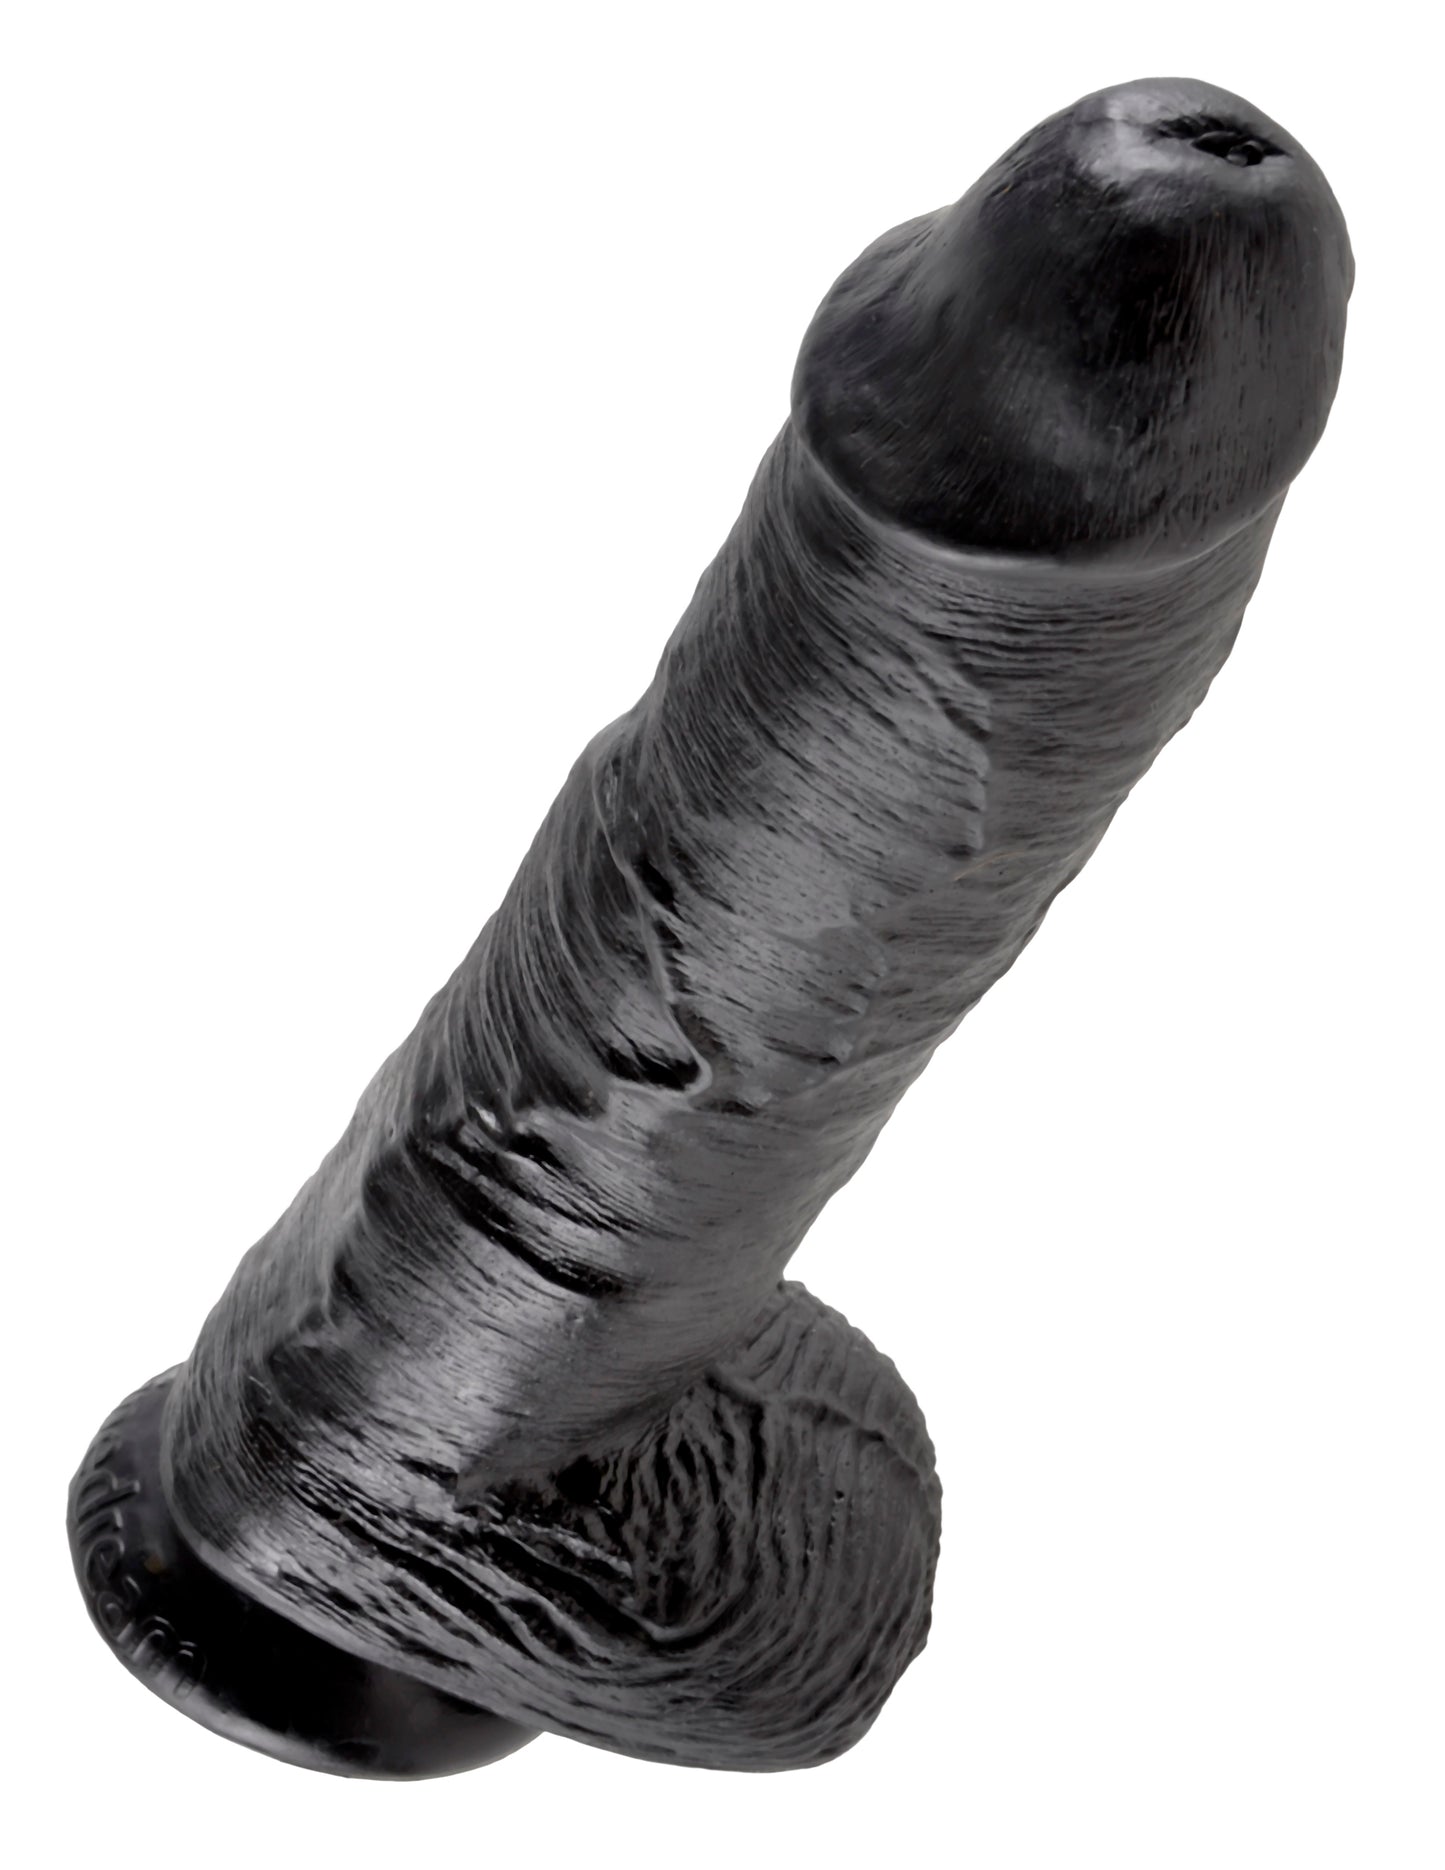 King Cock 7" with Balls